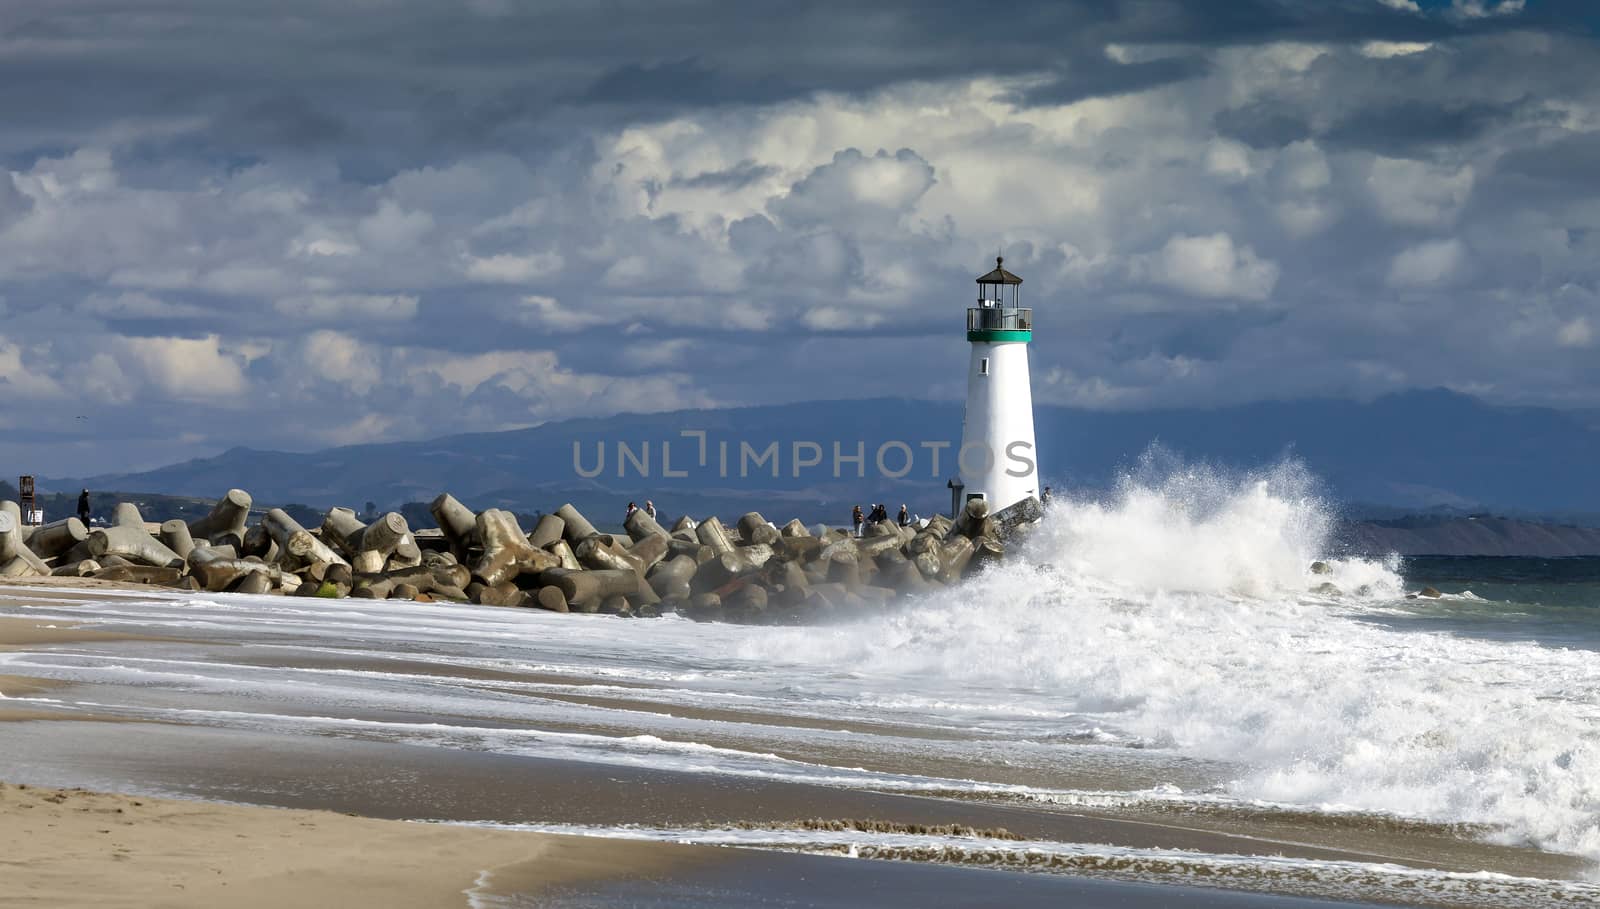 Santa Cruz, California, USA, November 1, 2014: Lighthouse Walton on Santa Cruz Shore with the surf and visitors. The lighthouse, designed by Mark Mesiti-Miller and constructed by Devcon Construction, Inc., stands 41 ½ feet tall above the level of the water.